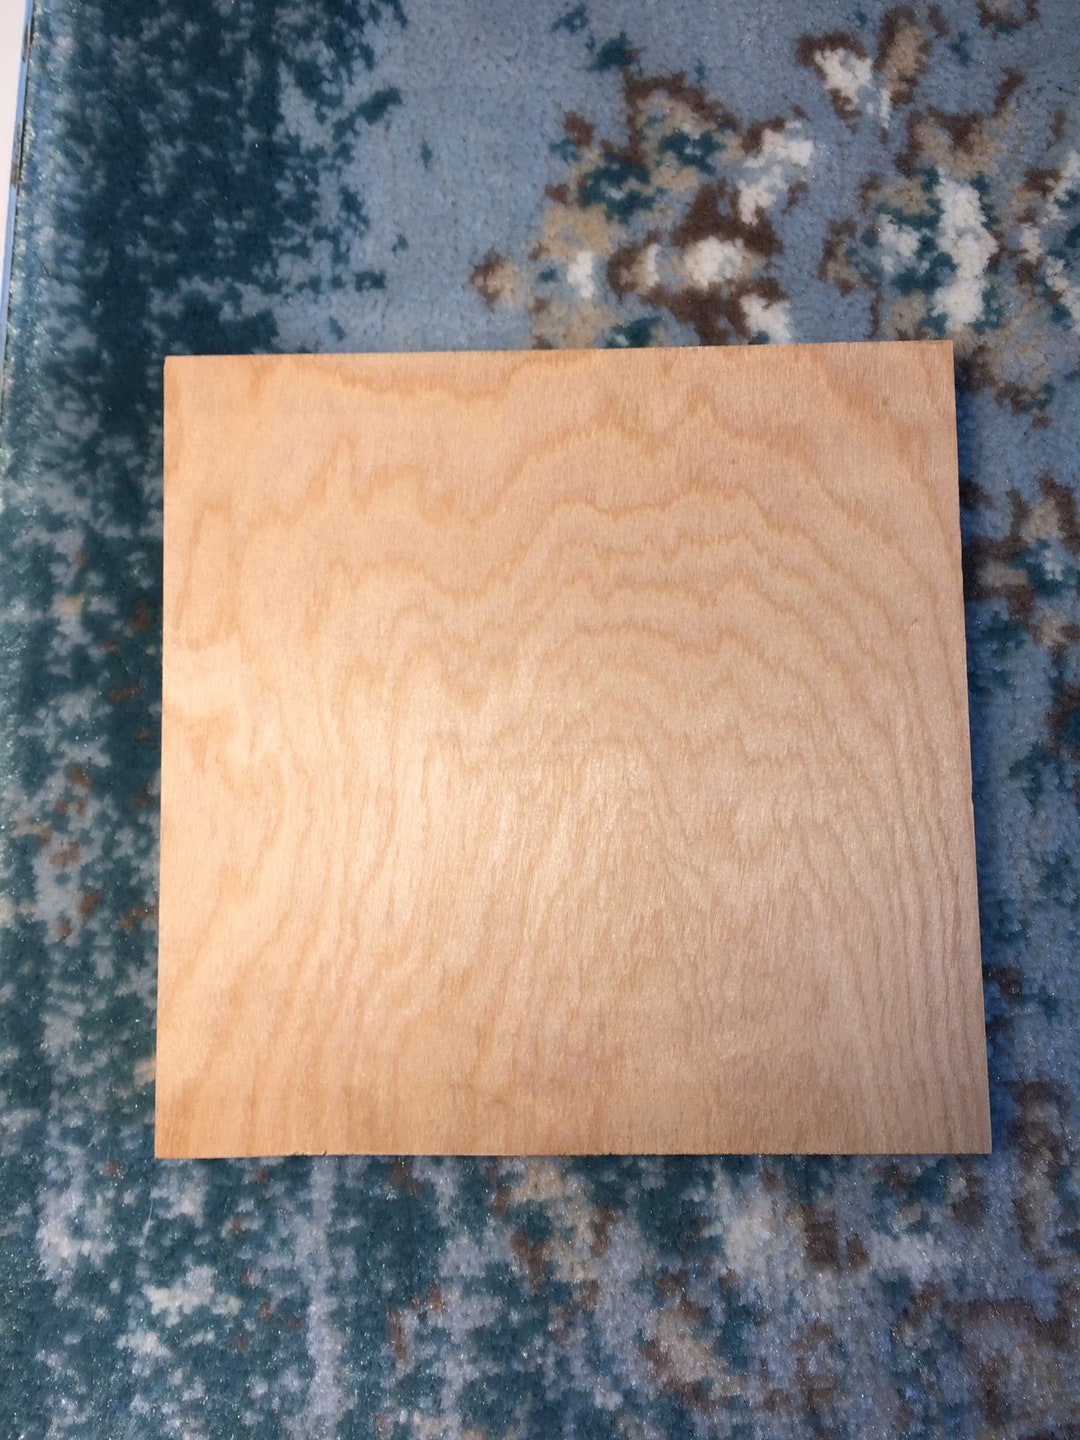 Houston - Birch Wood Cradled Panels For Art Projects